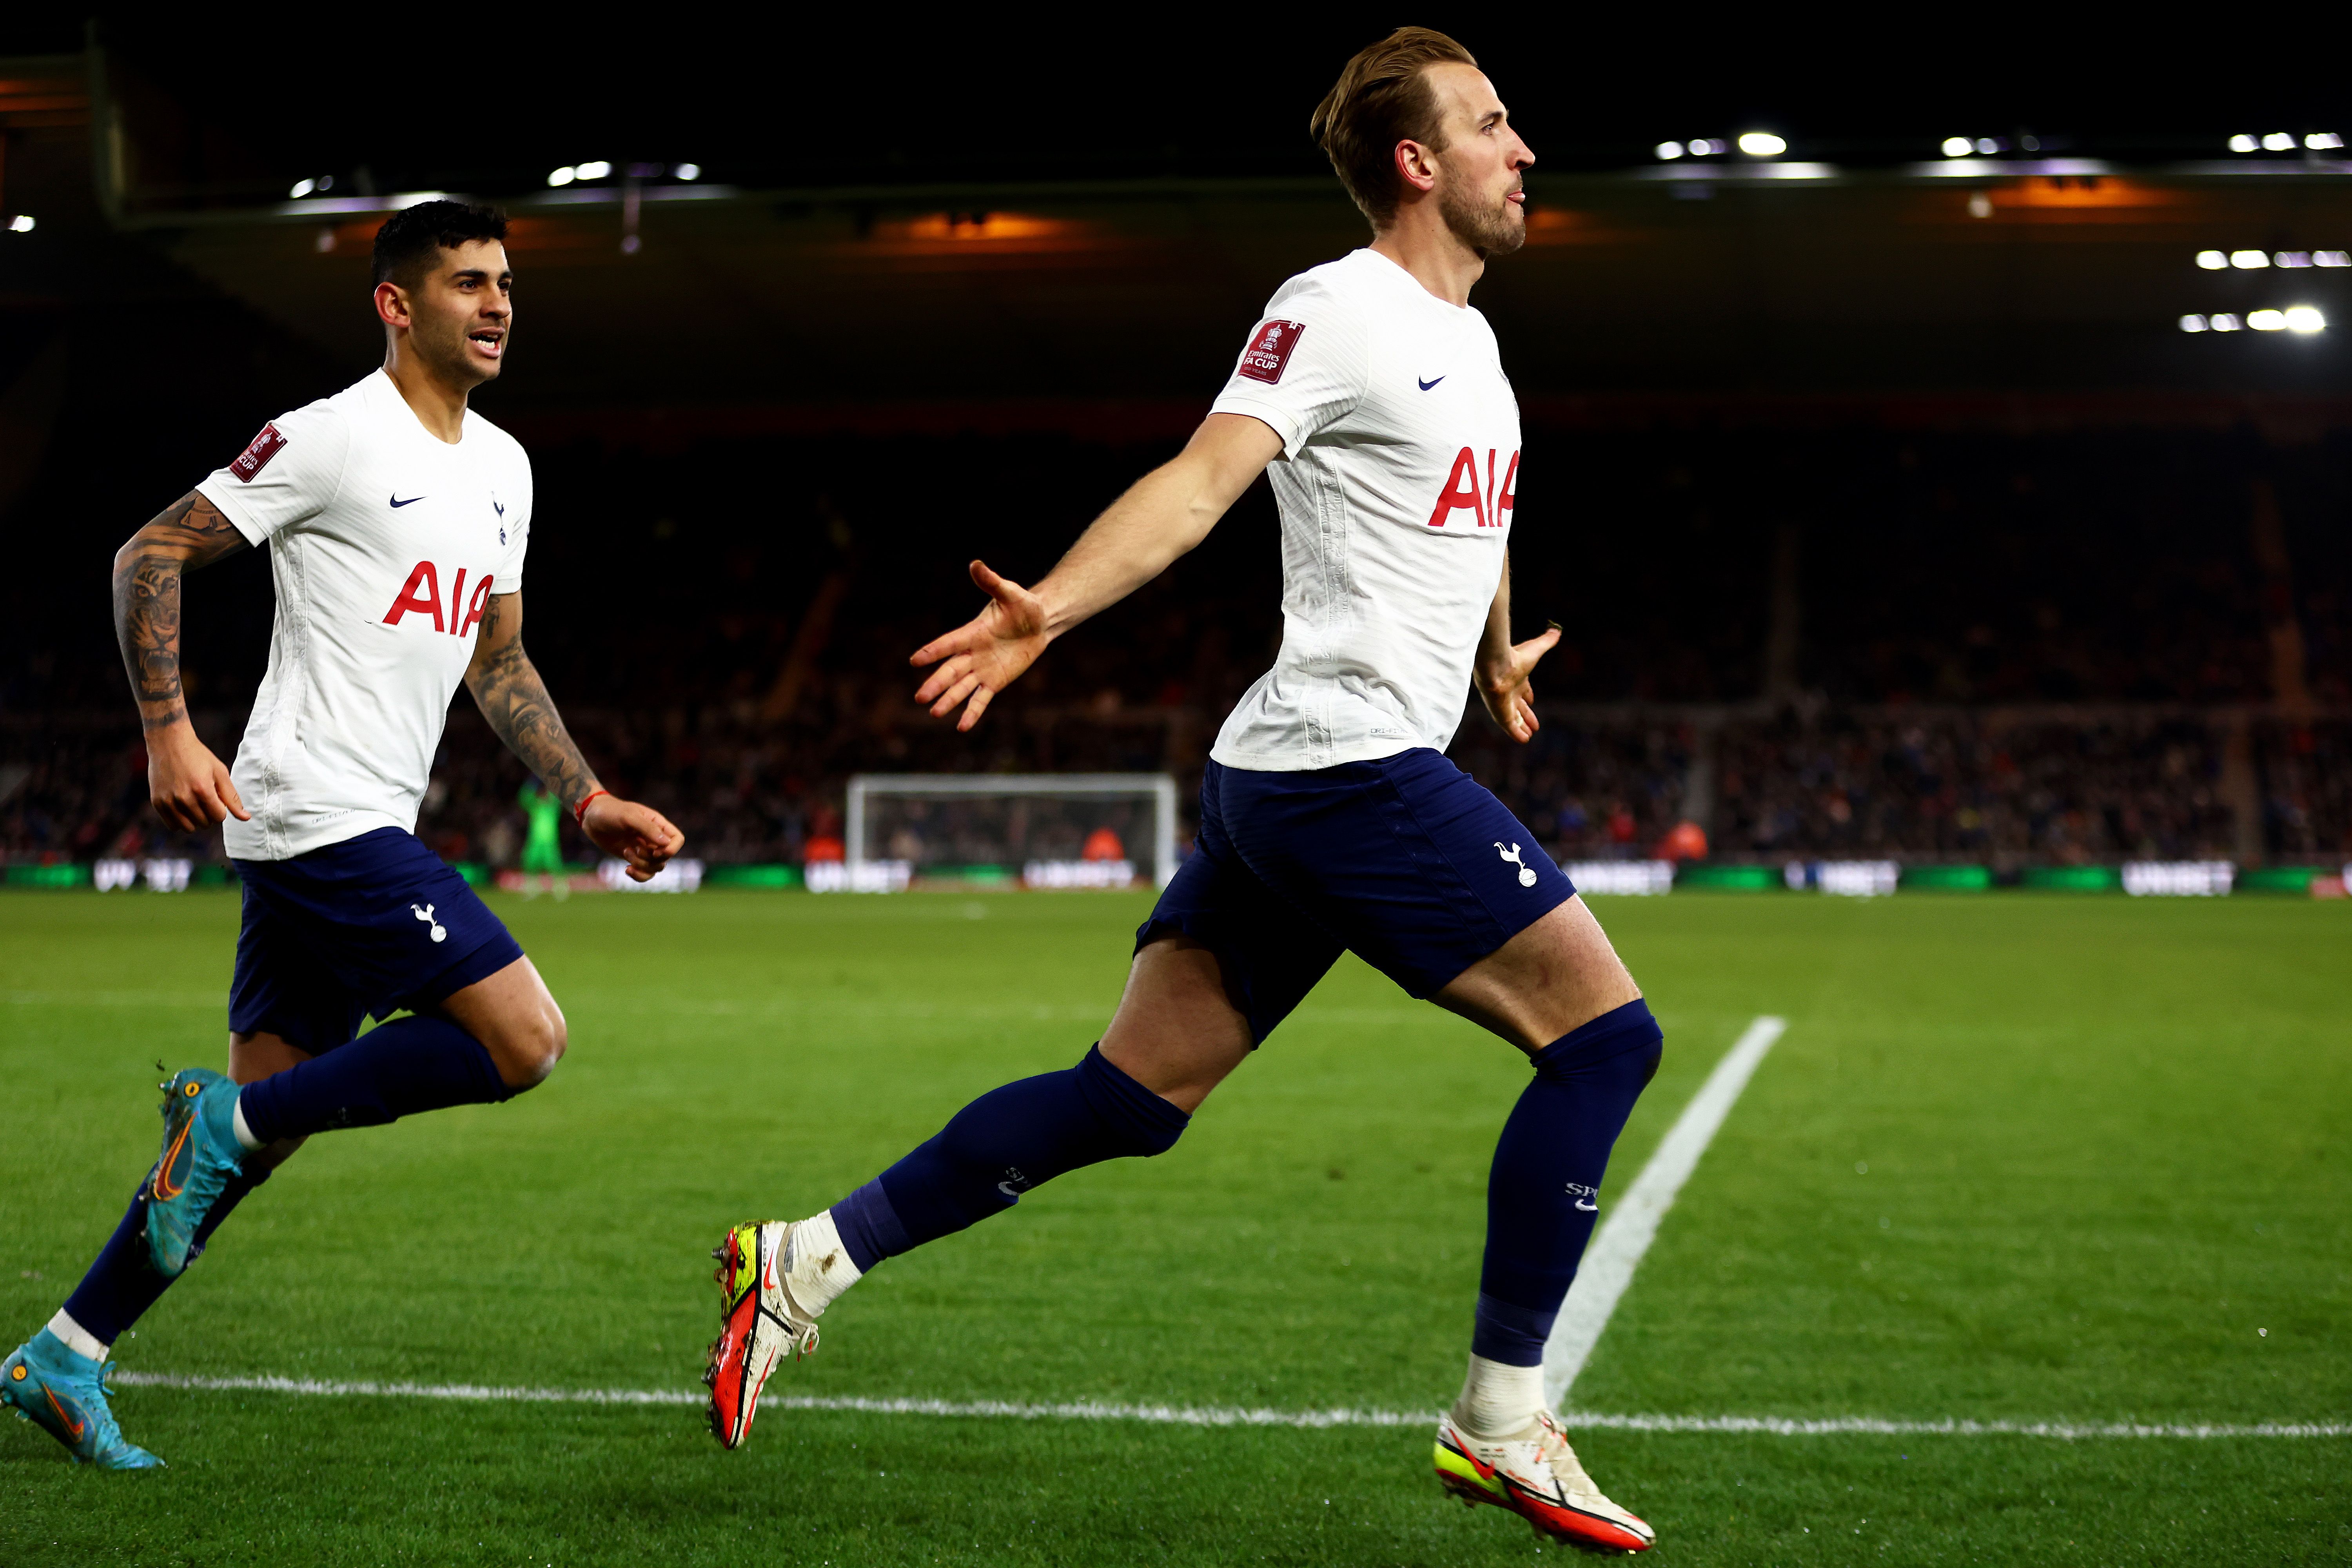 Harry Kane of Tottenham Hotspur celebrates a goal which was later disallowed for offside during the Emirates FA Cup Fifth Round match between Middlesbrough and Tottenham Hotspur at Riverside Stadium